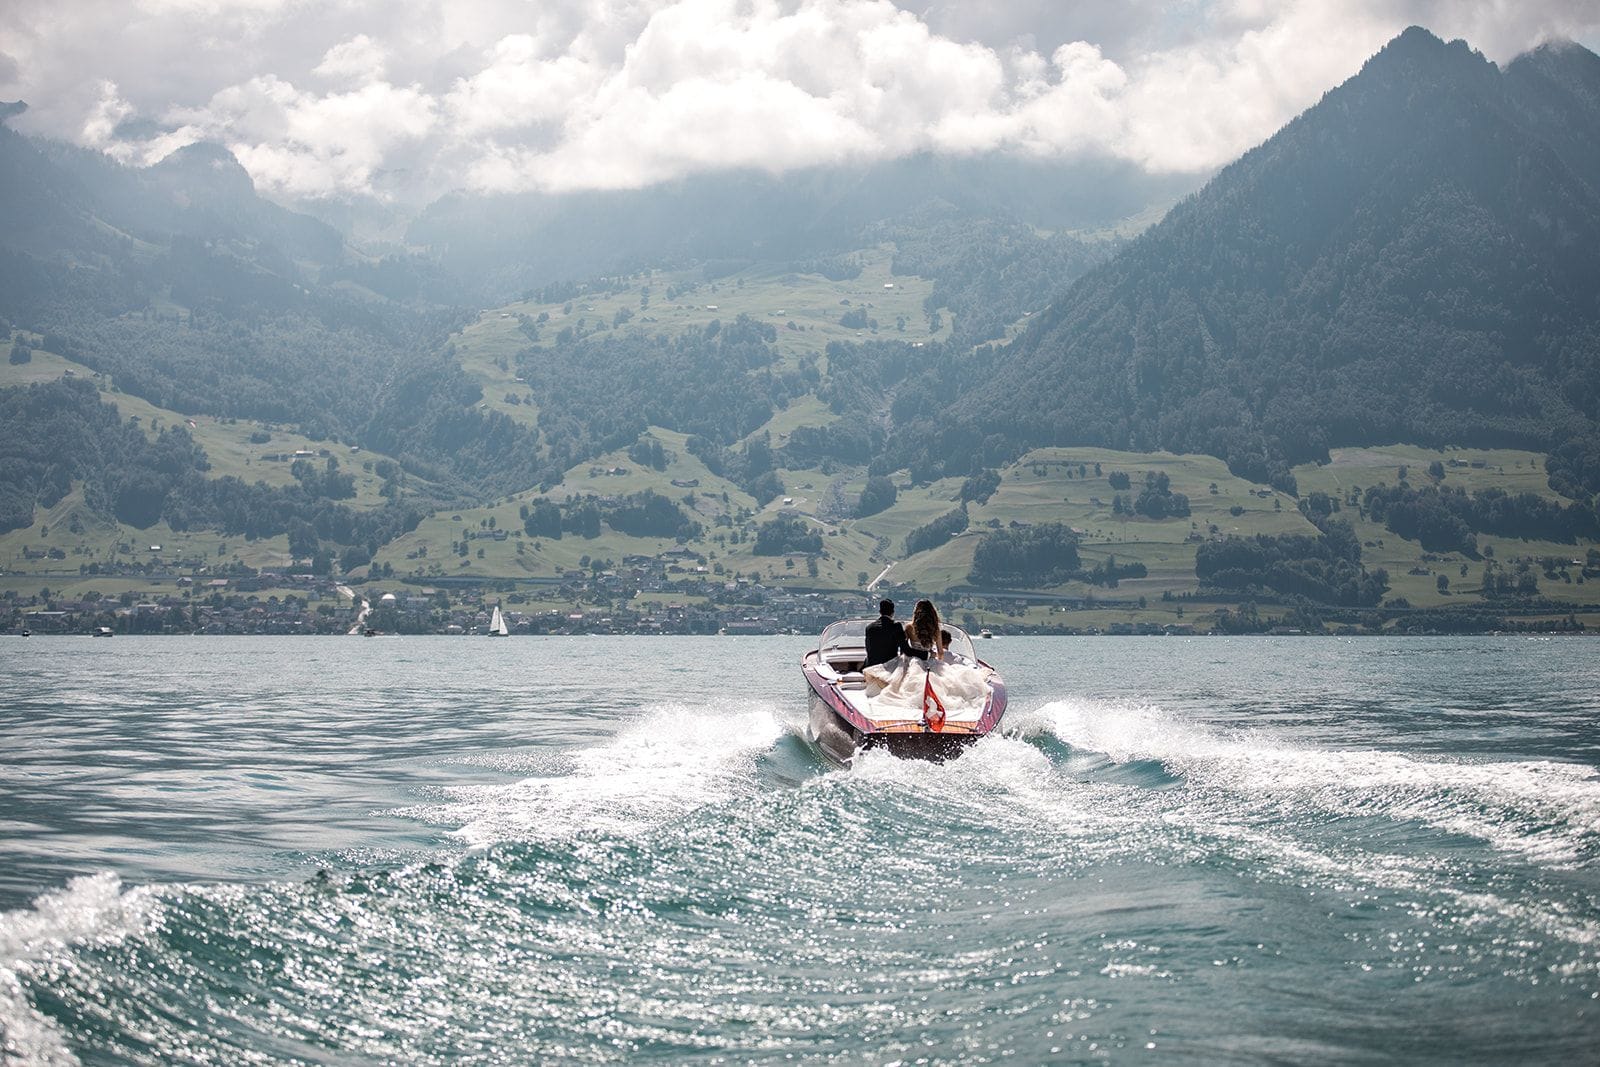 Bride and groom take boat ride for the scenic Lake Lucerne mountains